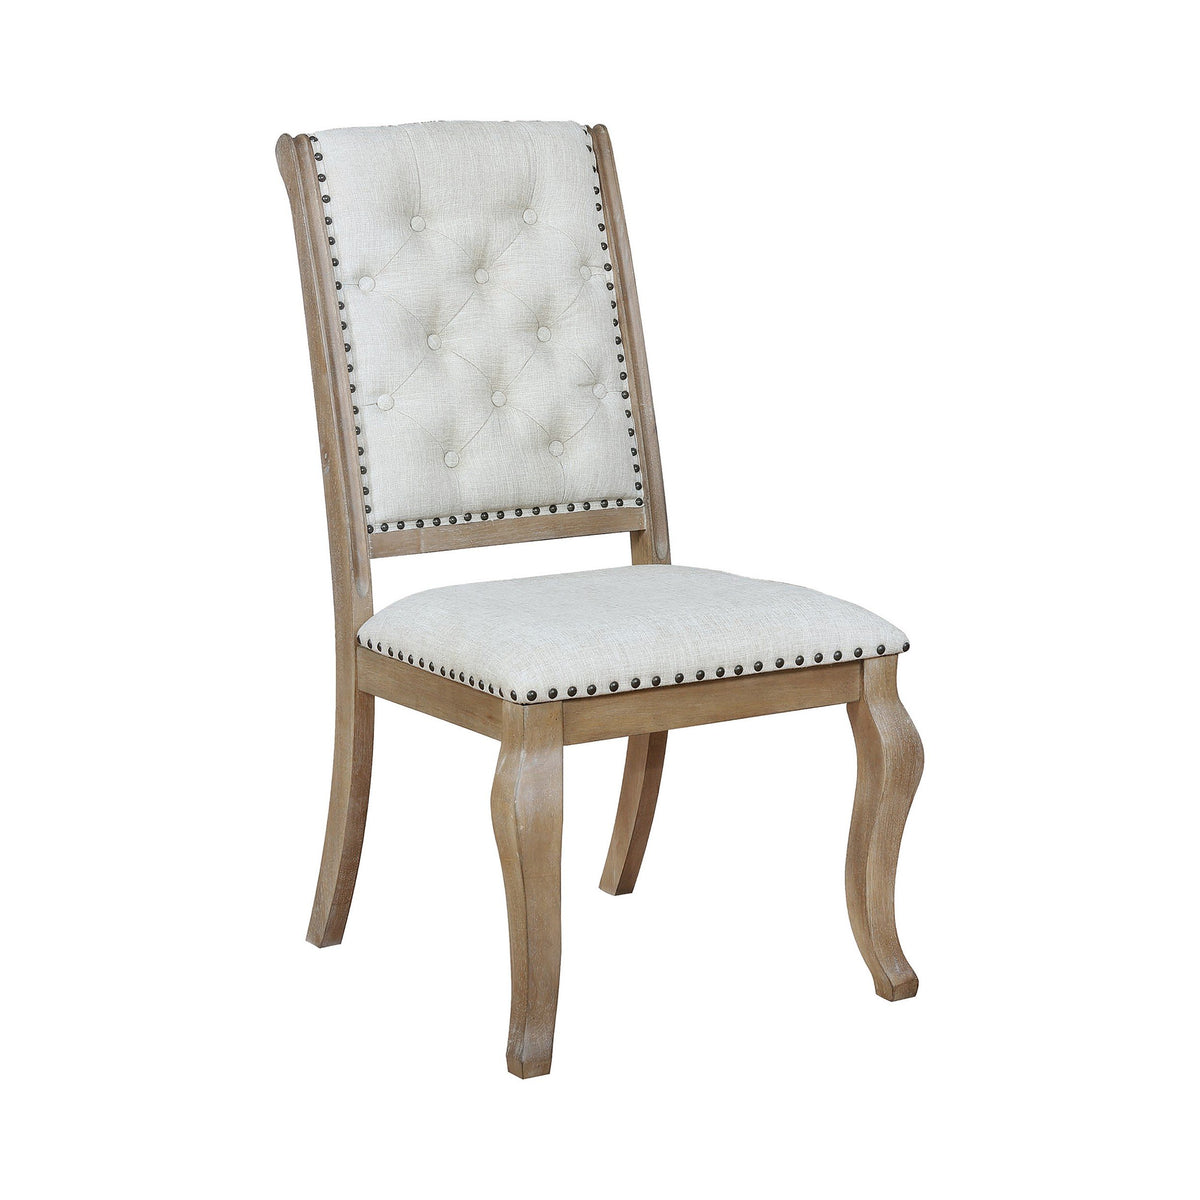 Button Tufted Fabric Side Chair with Cabriole Legs,Set of 2,Brown and Cream - BM230293